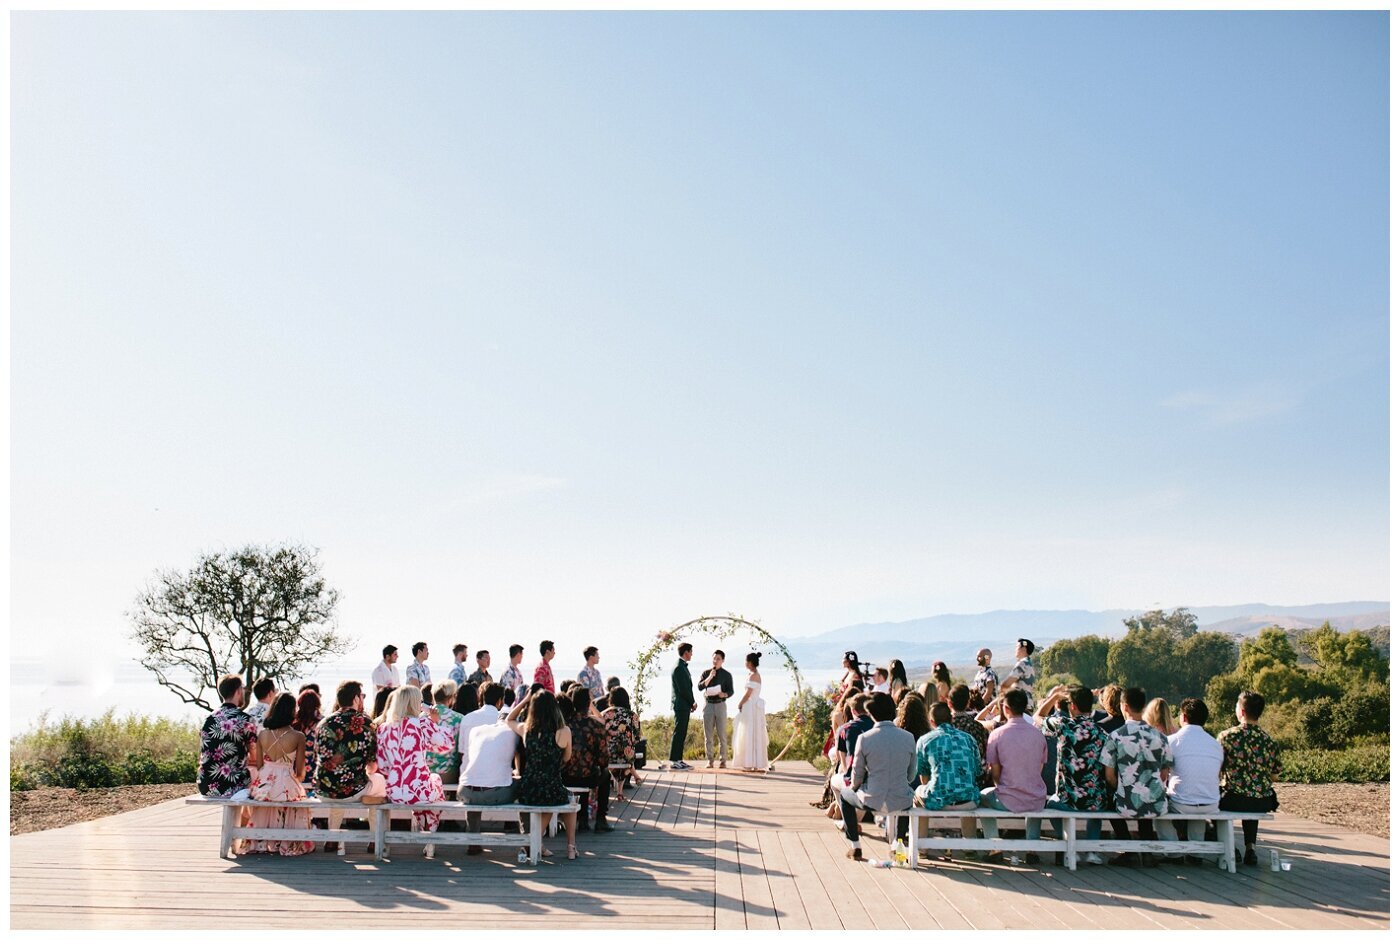 Full wedding at Dos Pueblos Orchid Farm.  The bride and groom are sttanding under a circle arch with their bridal party on the sides. There are a lot of guests looking. The view overlooks some cliffs and ocean